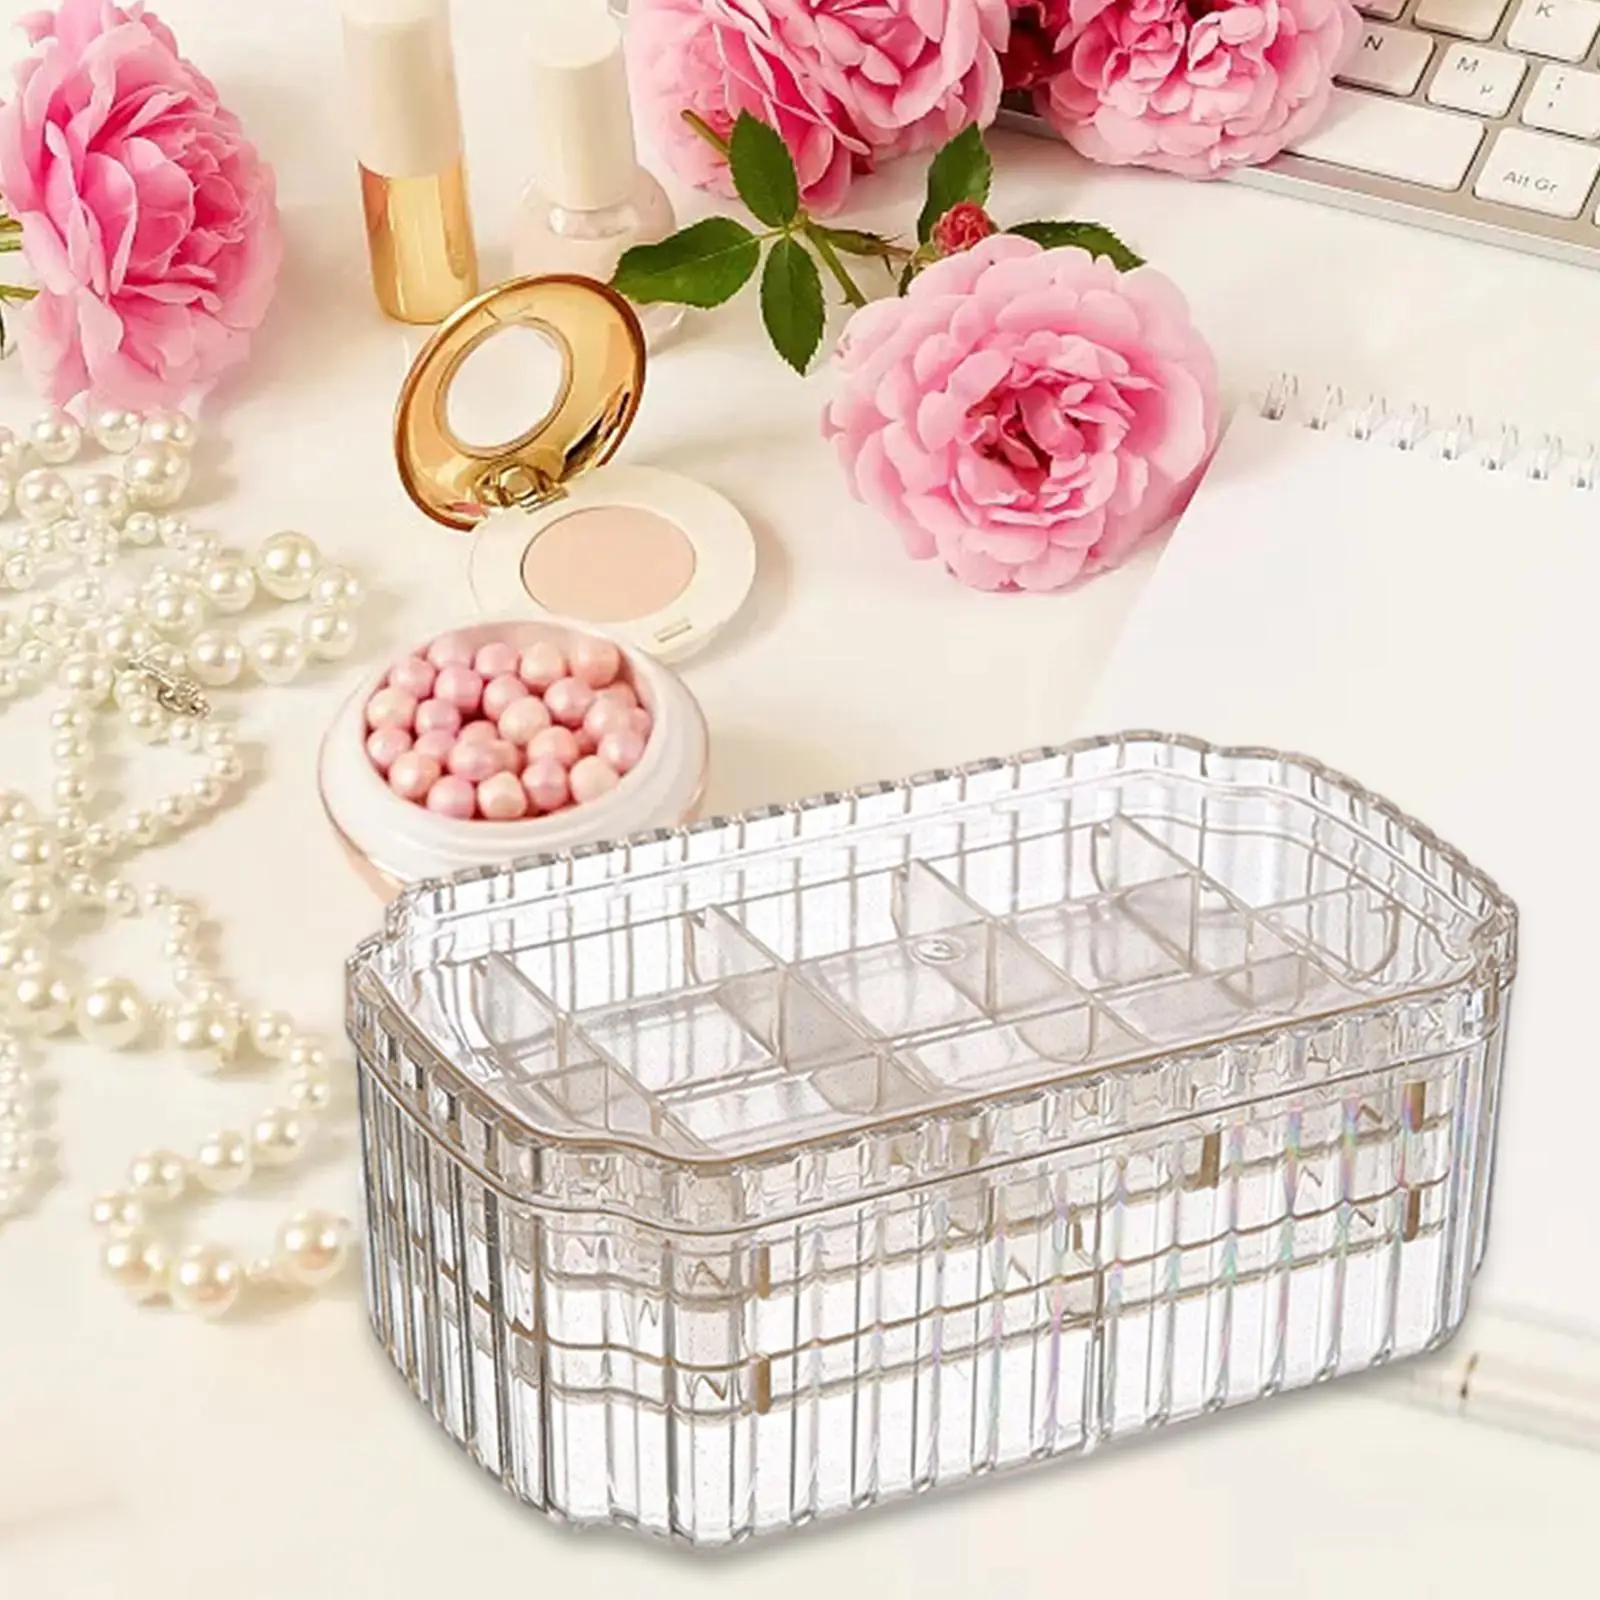 Earring Display Case 3 Layer Jewelry Organizer with Compartments 19x11x7.5cm/7.5x4.3x3inch for Earrings Studs Necklaces